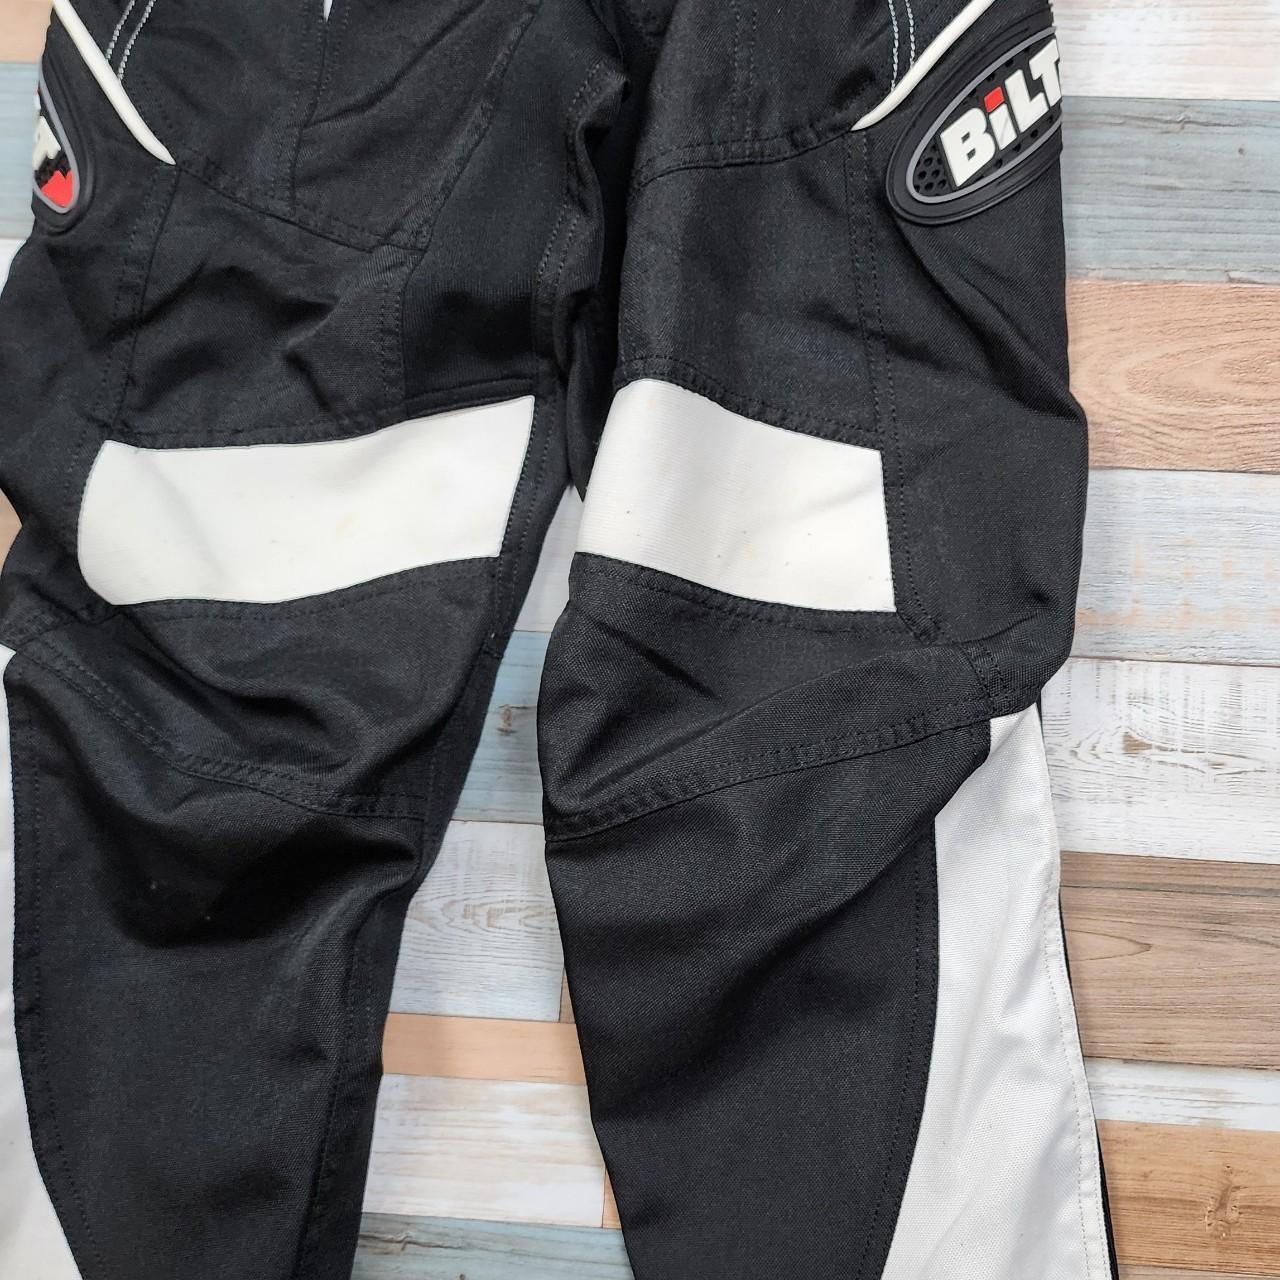 What's your favorite brand of riding pants and where can i buy them? L... |  TikTok